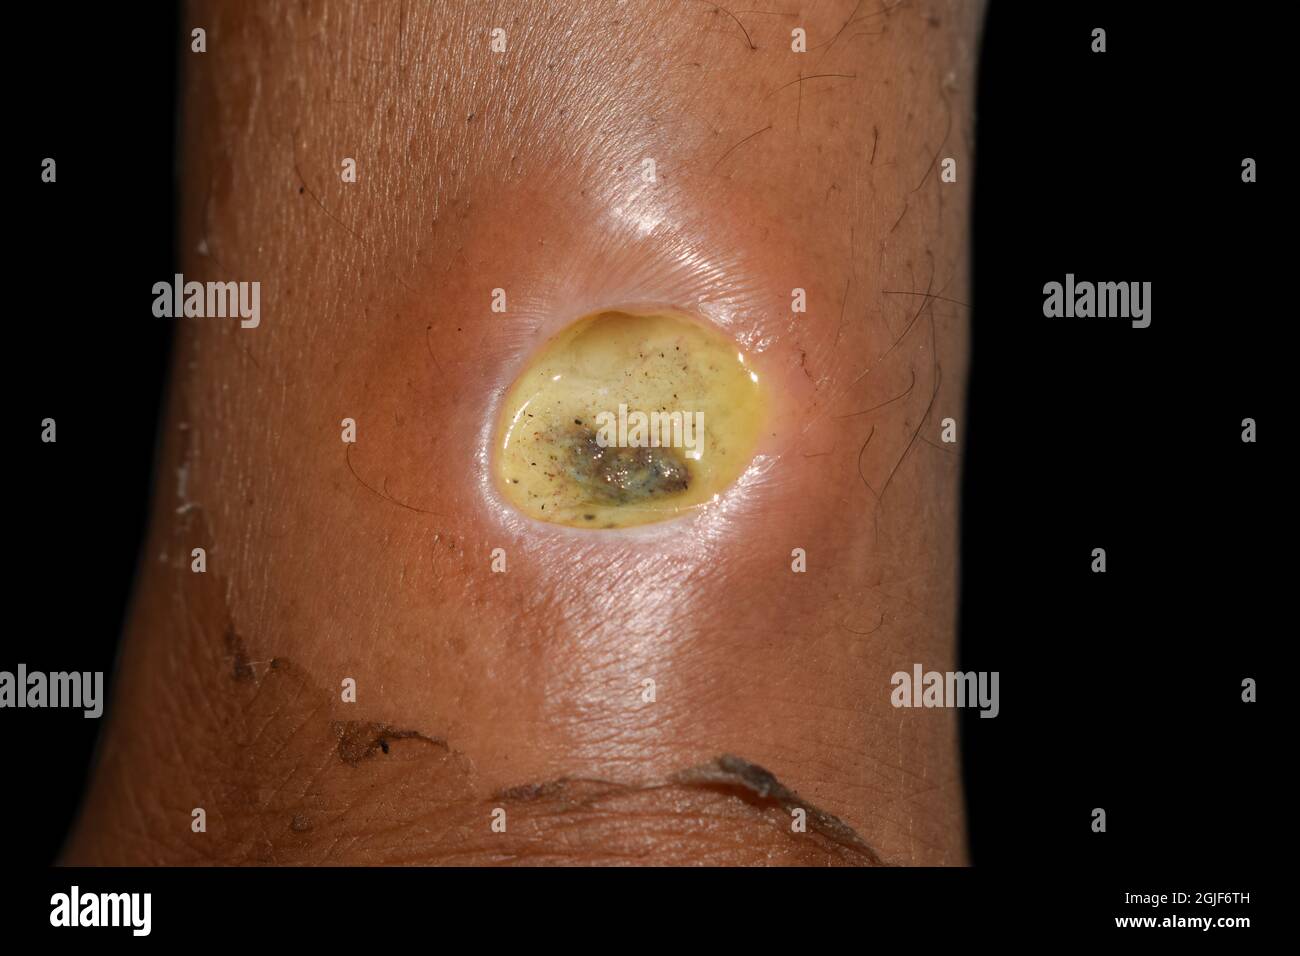 Diabetic ulcer in leg of Asian. patient. Poor wound healing. Isolated on black. Stock Photo